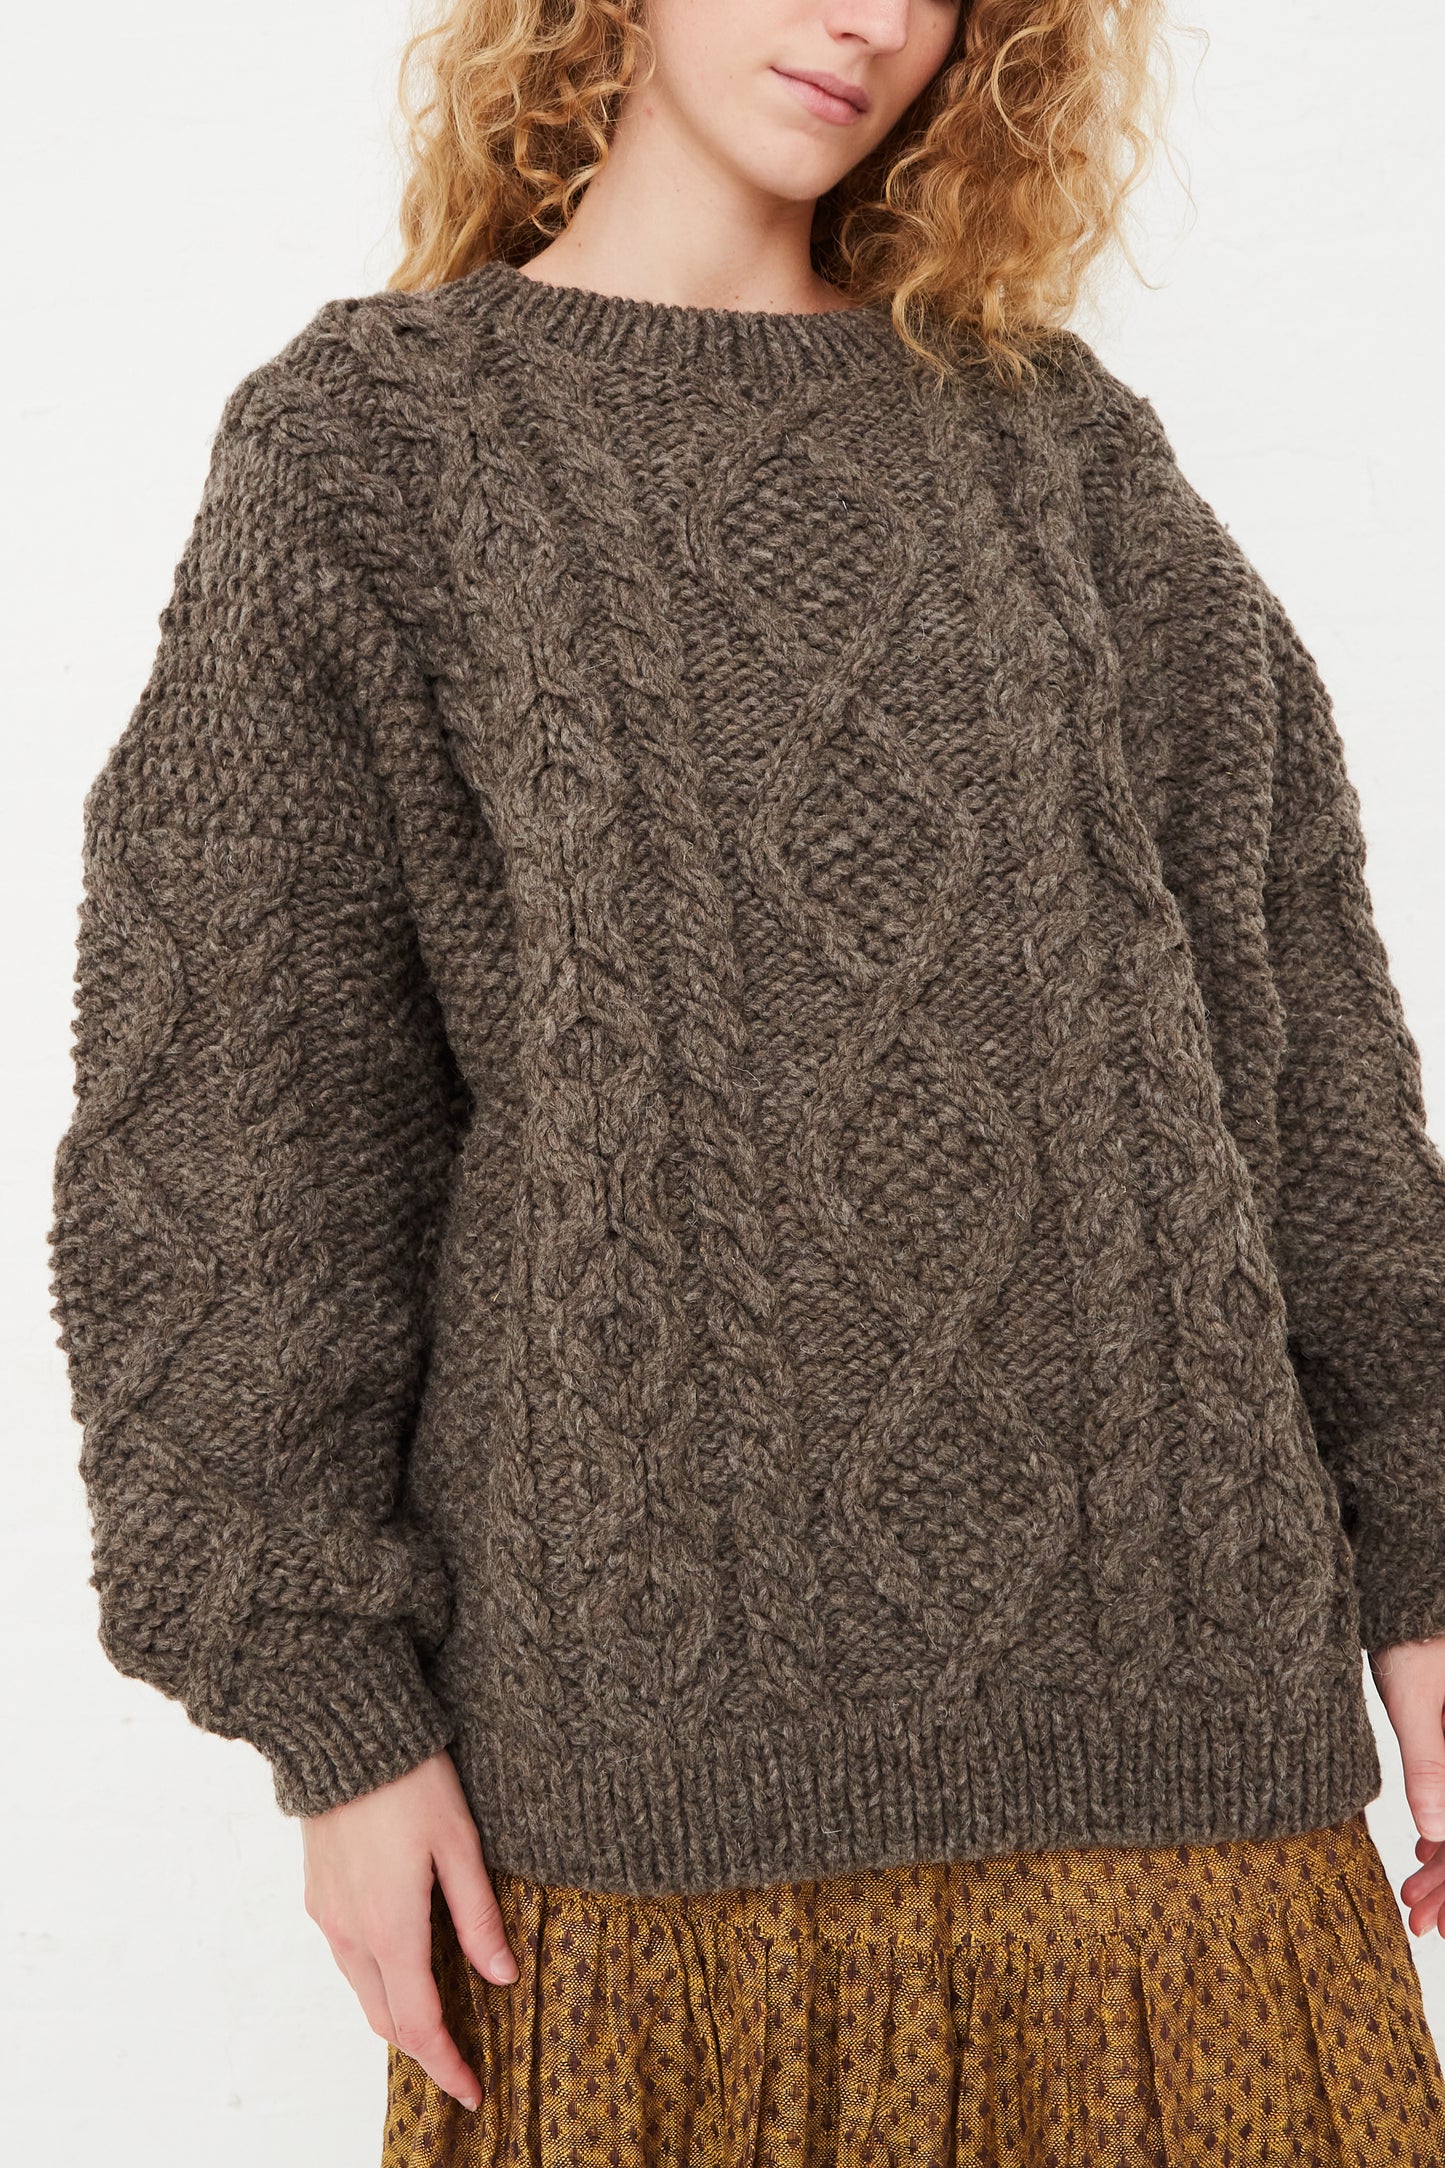 The model is wearing a Wool Hand-Knit Pullover in Mocha by Ichi Antiquités.